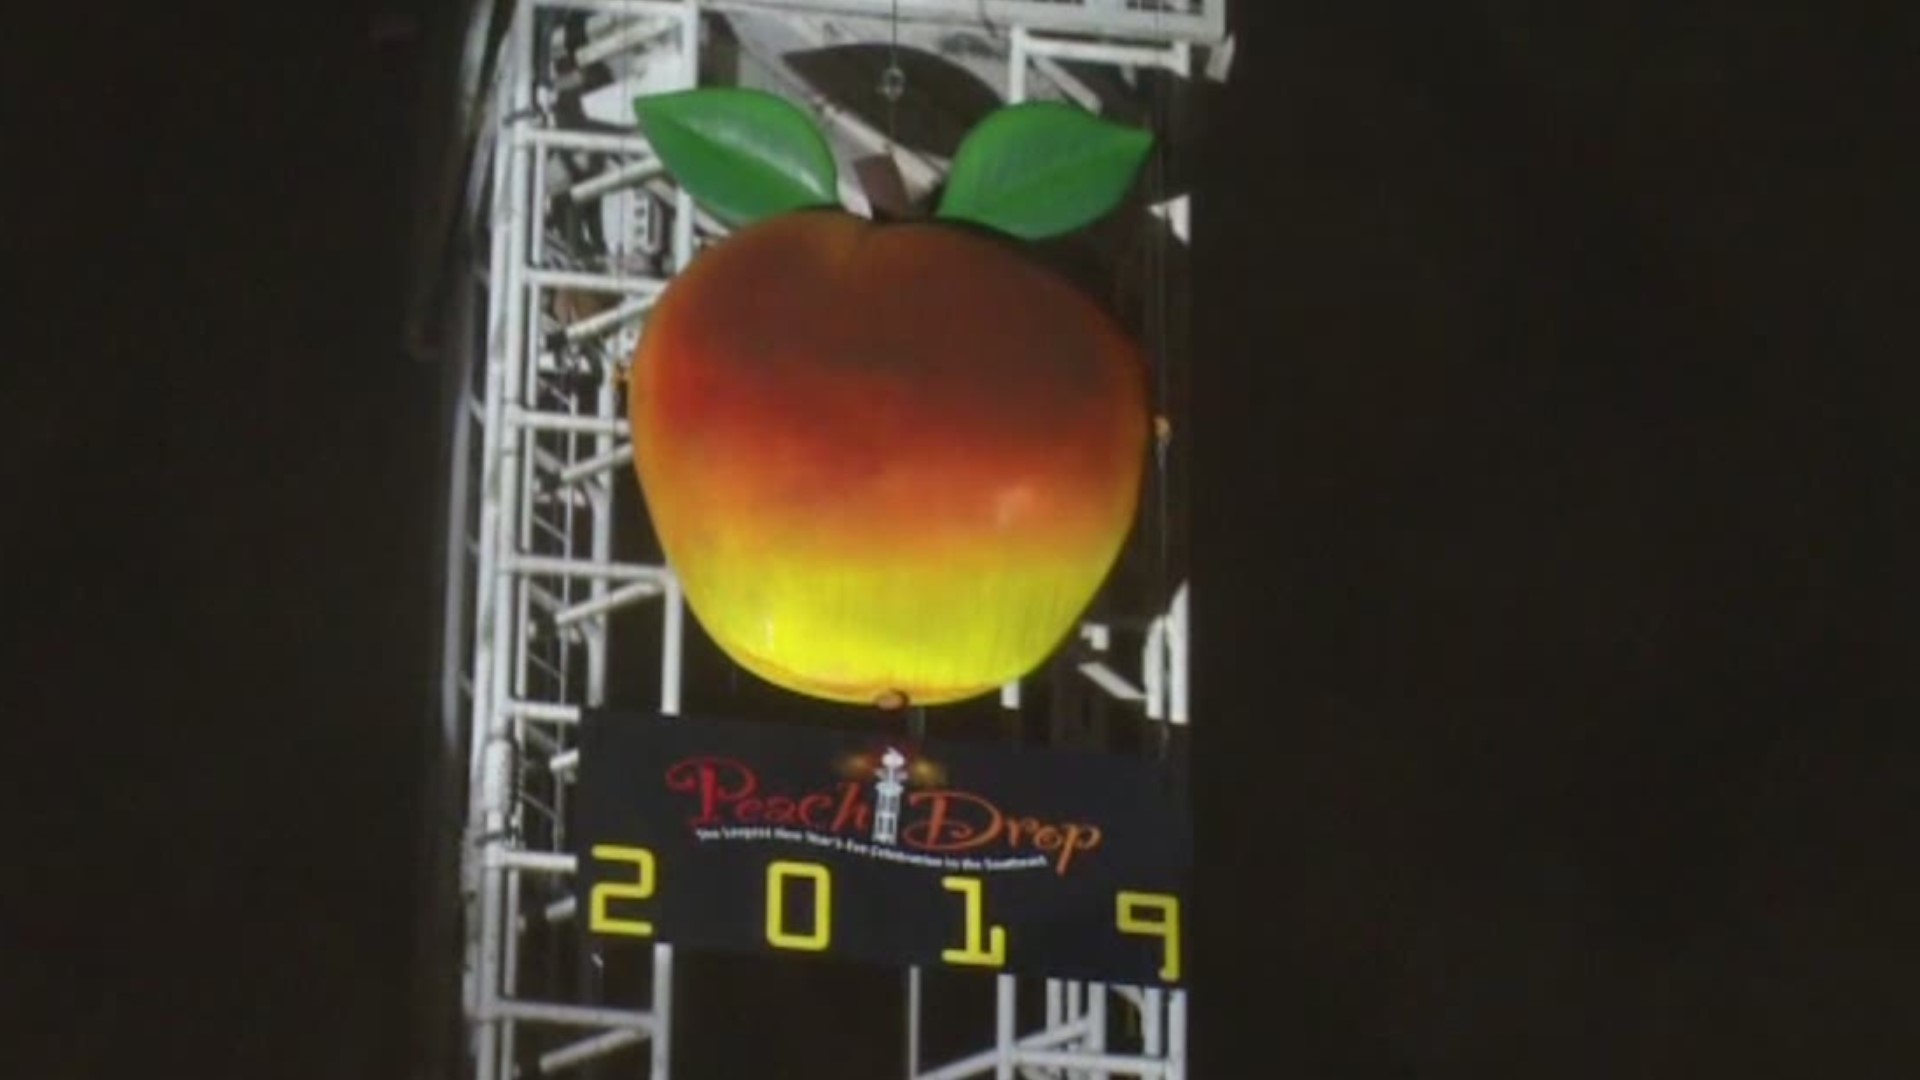 What you need to know about this year's Peach Drop